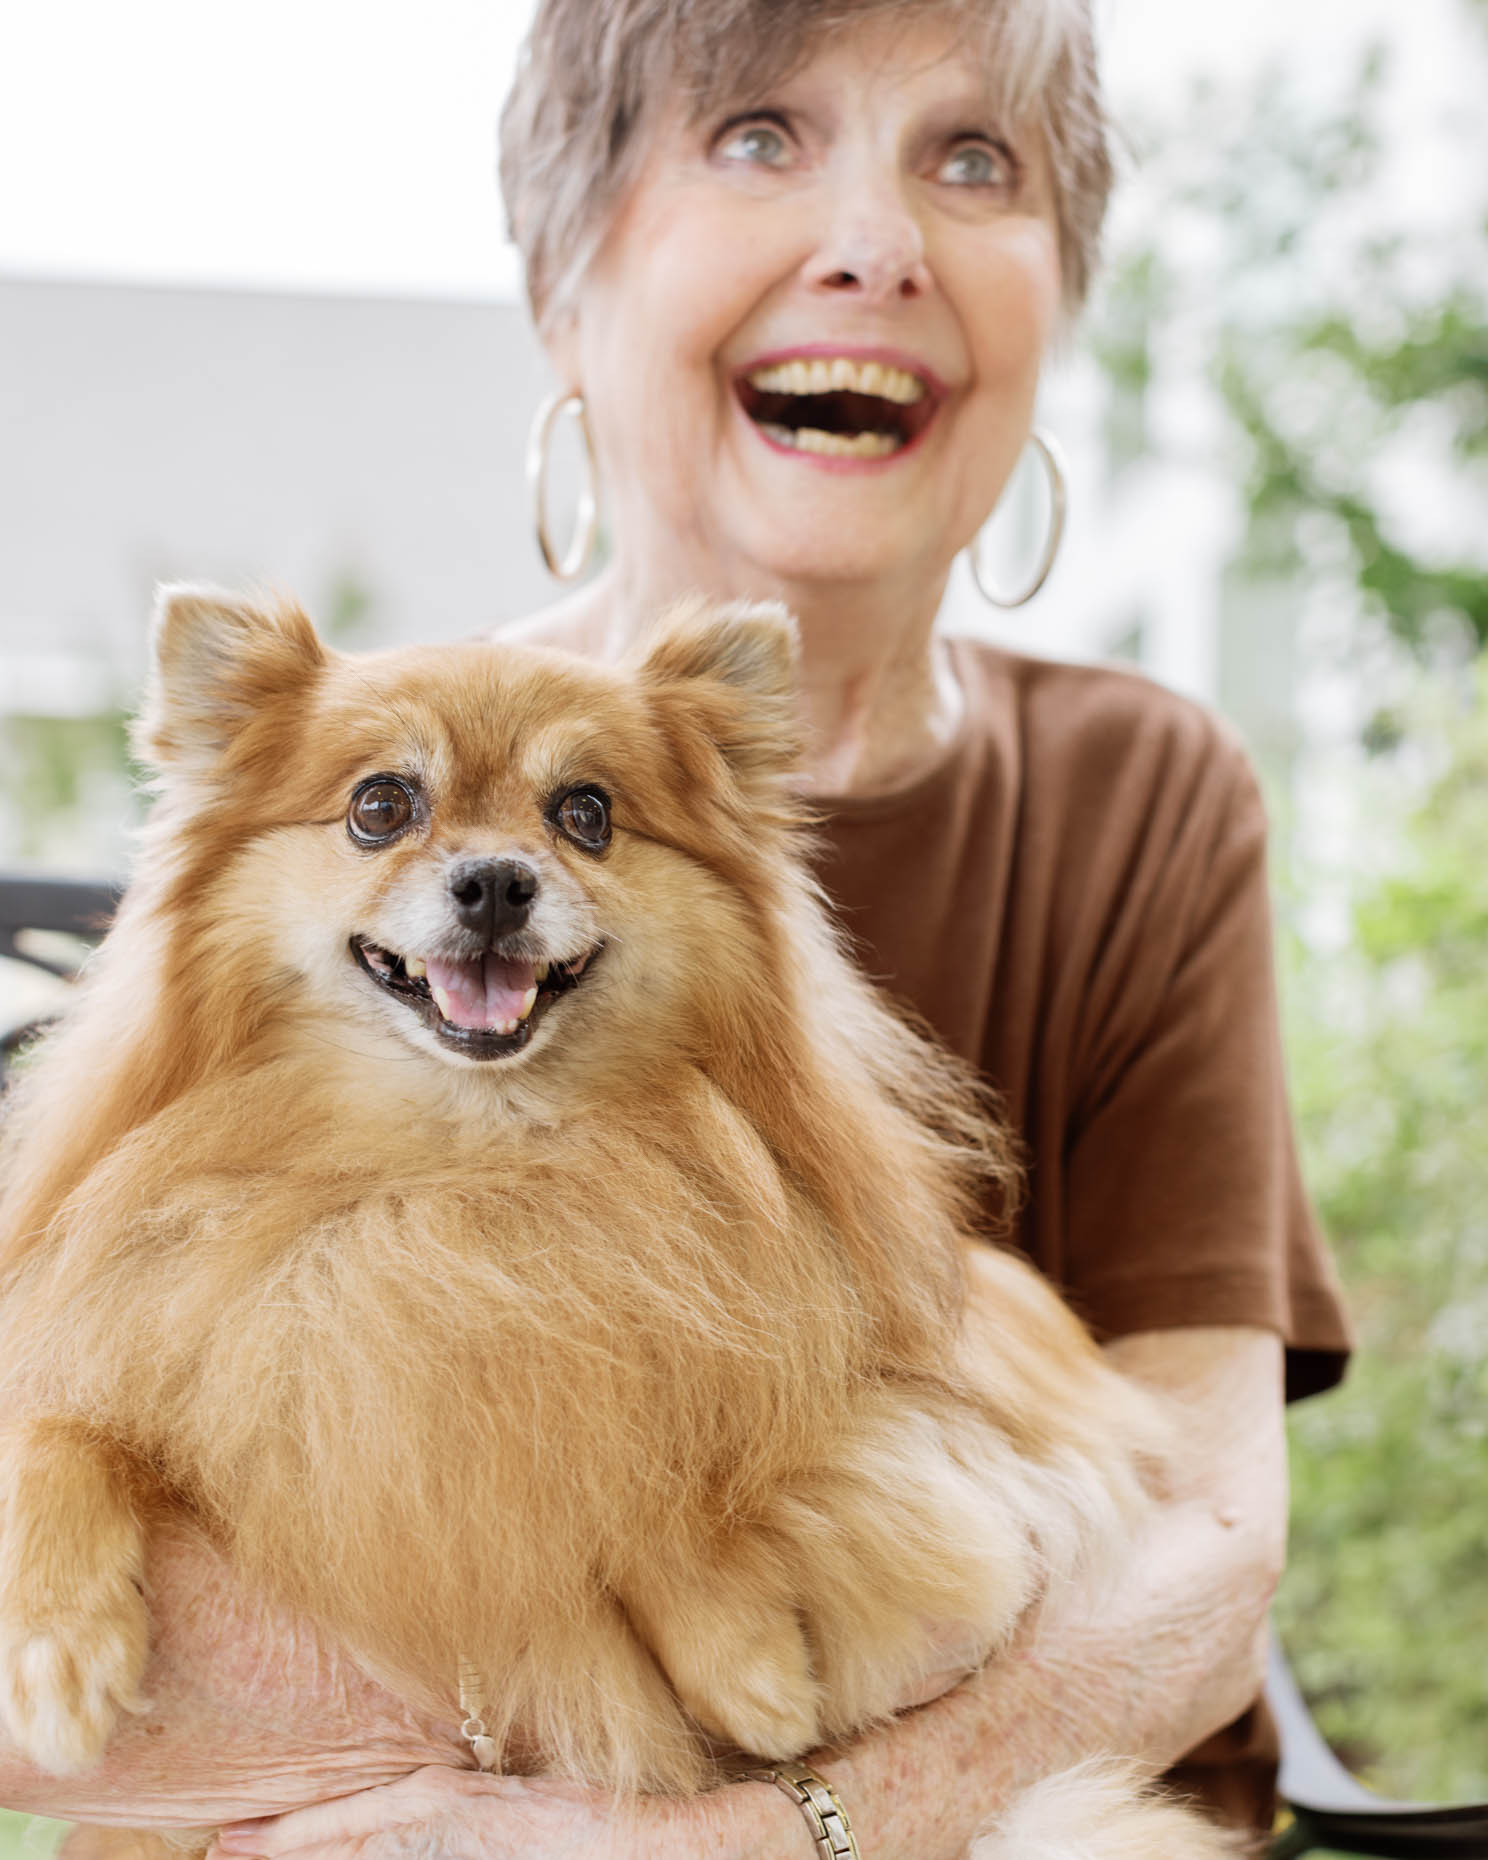 Spunky fun retired woman holding her dog at a senior living community